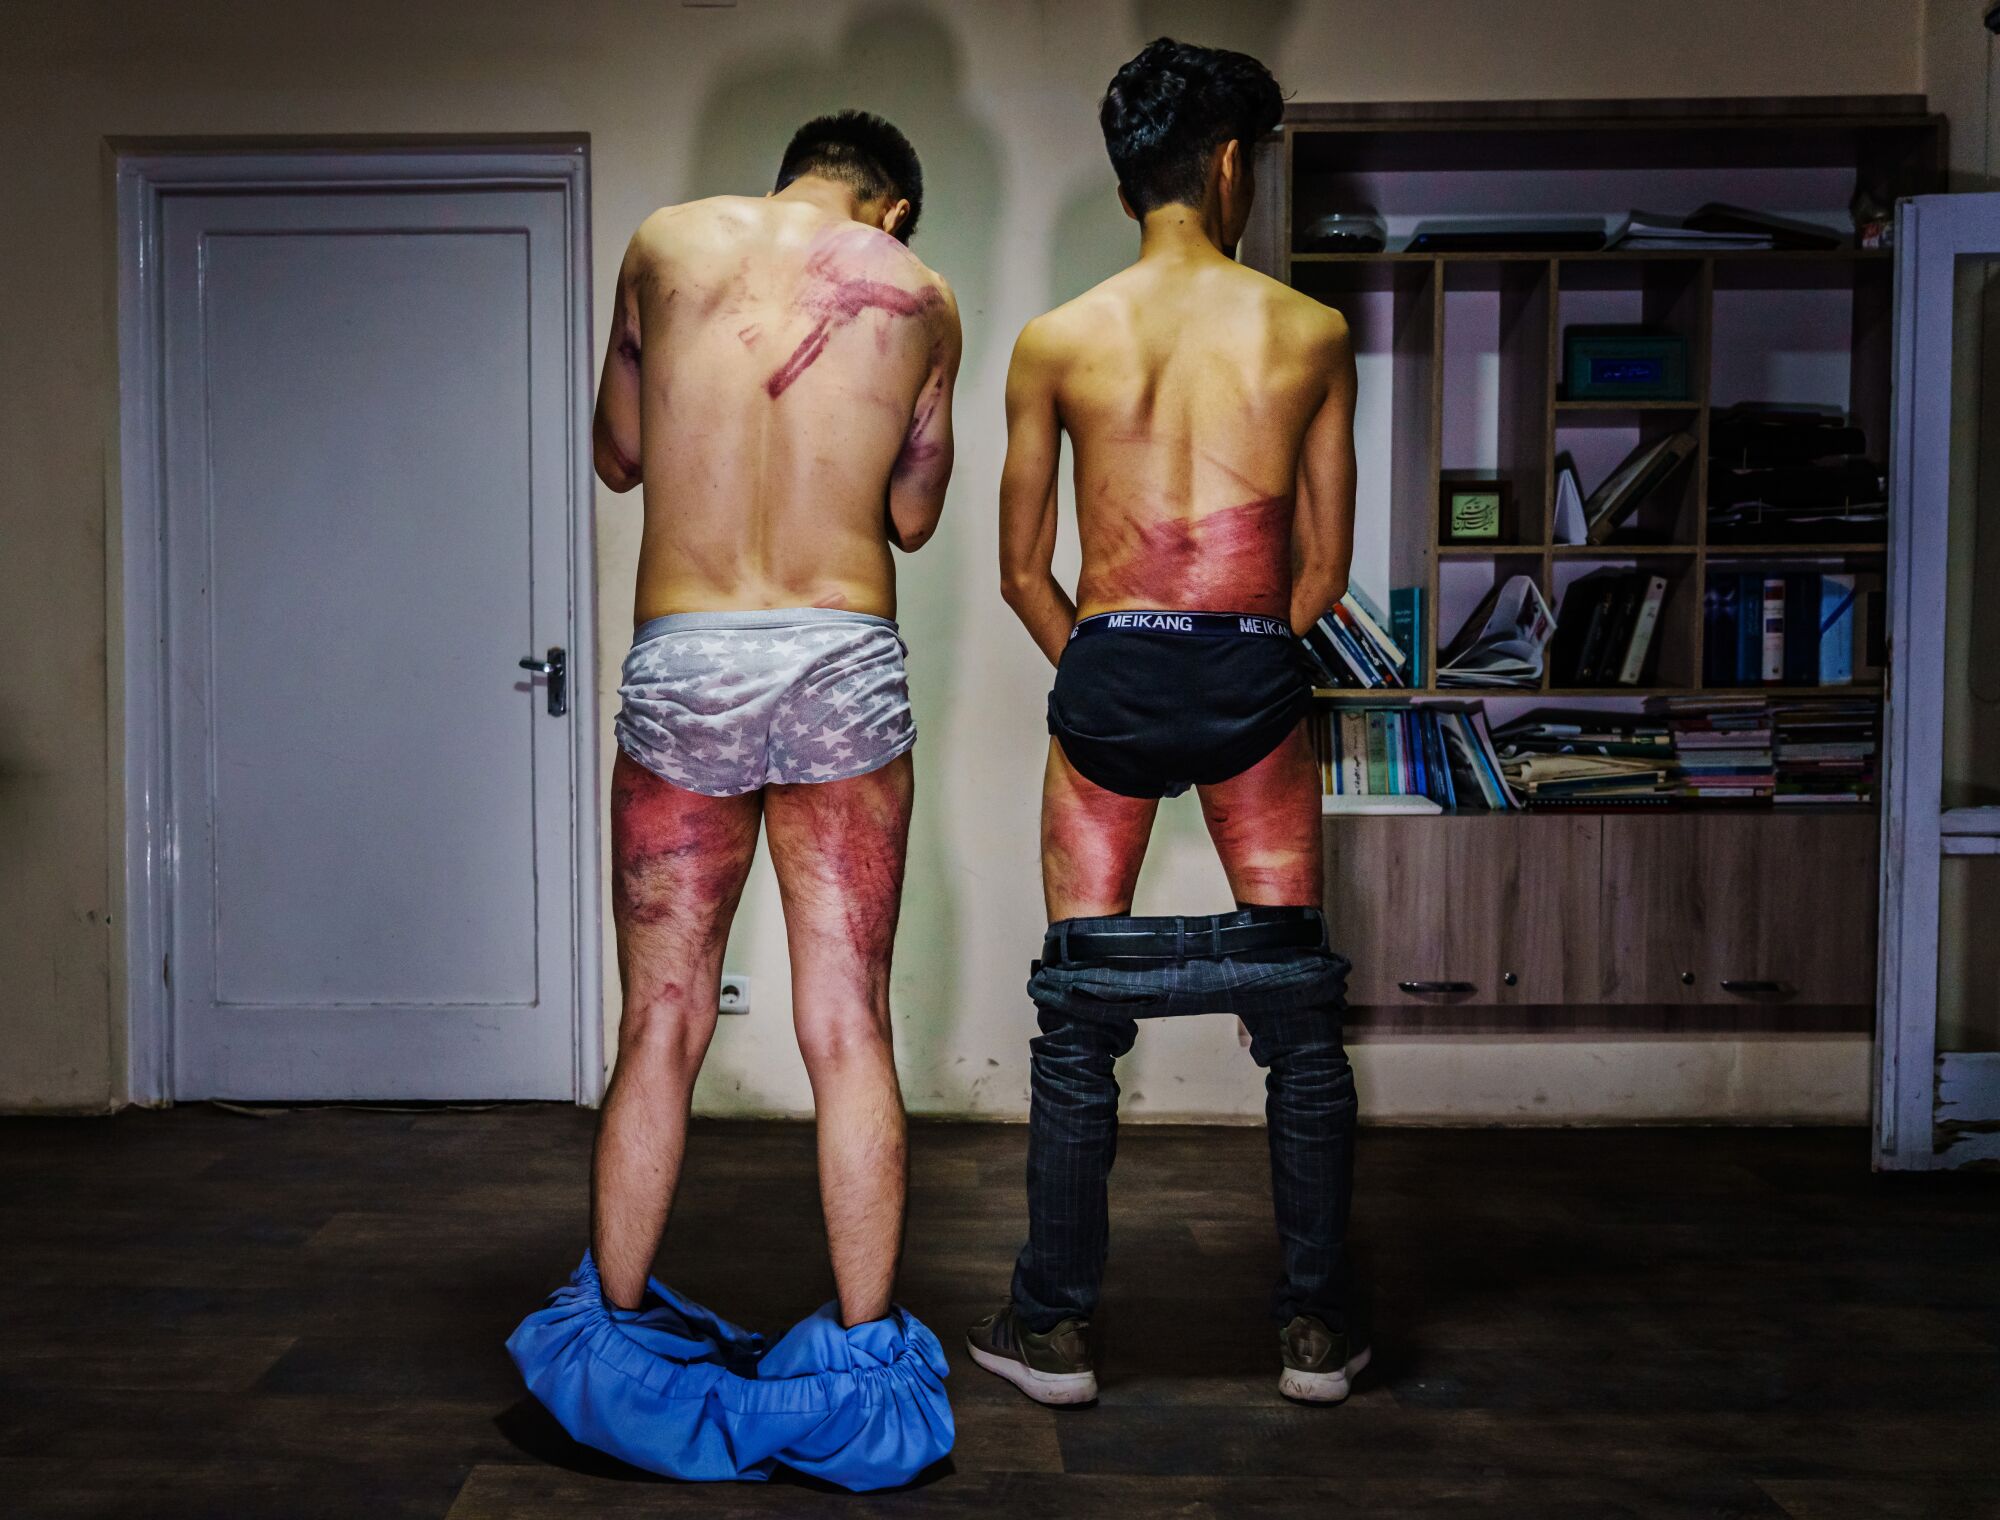 Two men show their purple wounds on their backs and legs